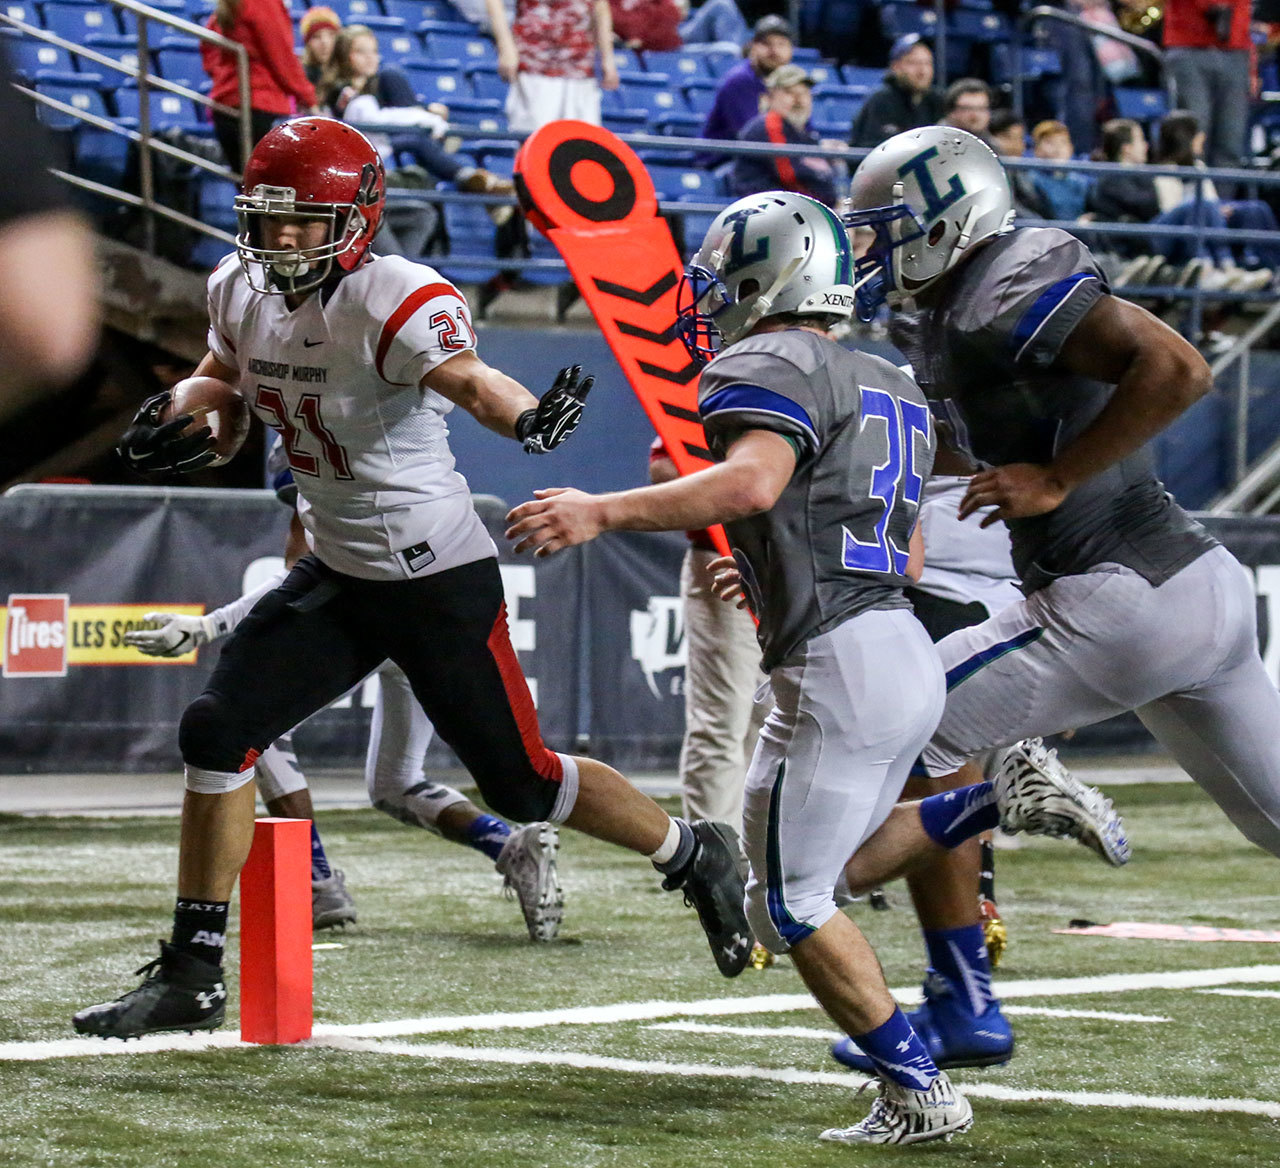 Archbishop Murphy’s Collin Montez crosses the goal line for a touchdown with Liberty’s Juan Flores (35) and Julian Bruce trailing during the 2A state championship game on Saturday at the Tacoma Dome. Archbishop Murphy defeated Liberty 56-14. (Kevin Clark / The Herald)
